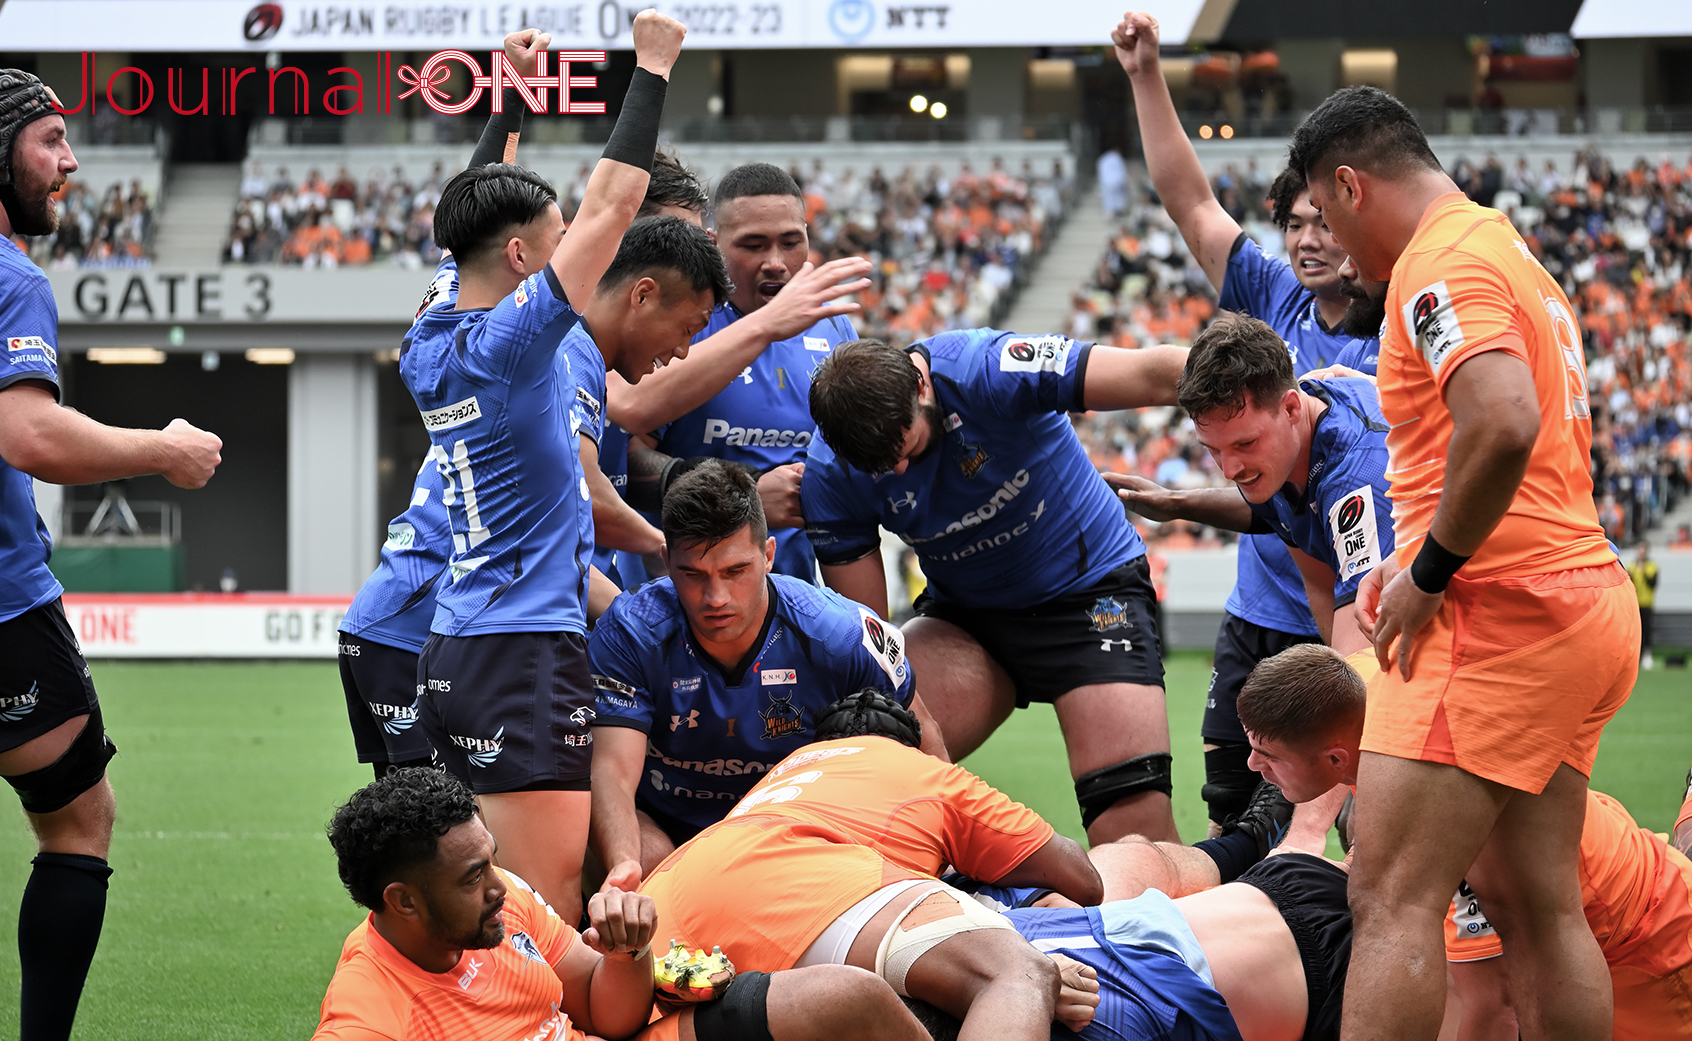 Japan Rugby League One final match, Shota Horie (Japan rugby union team) scored a try; Photo by Journal-ONE